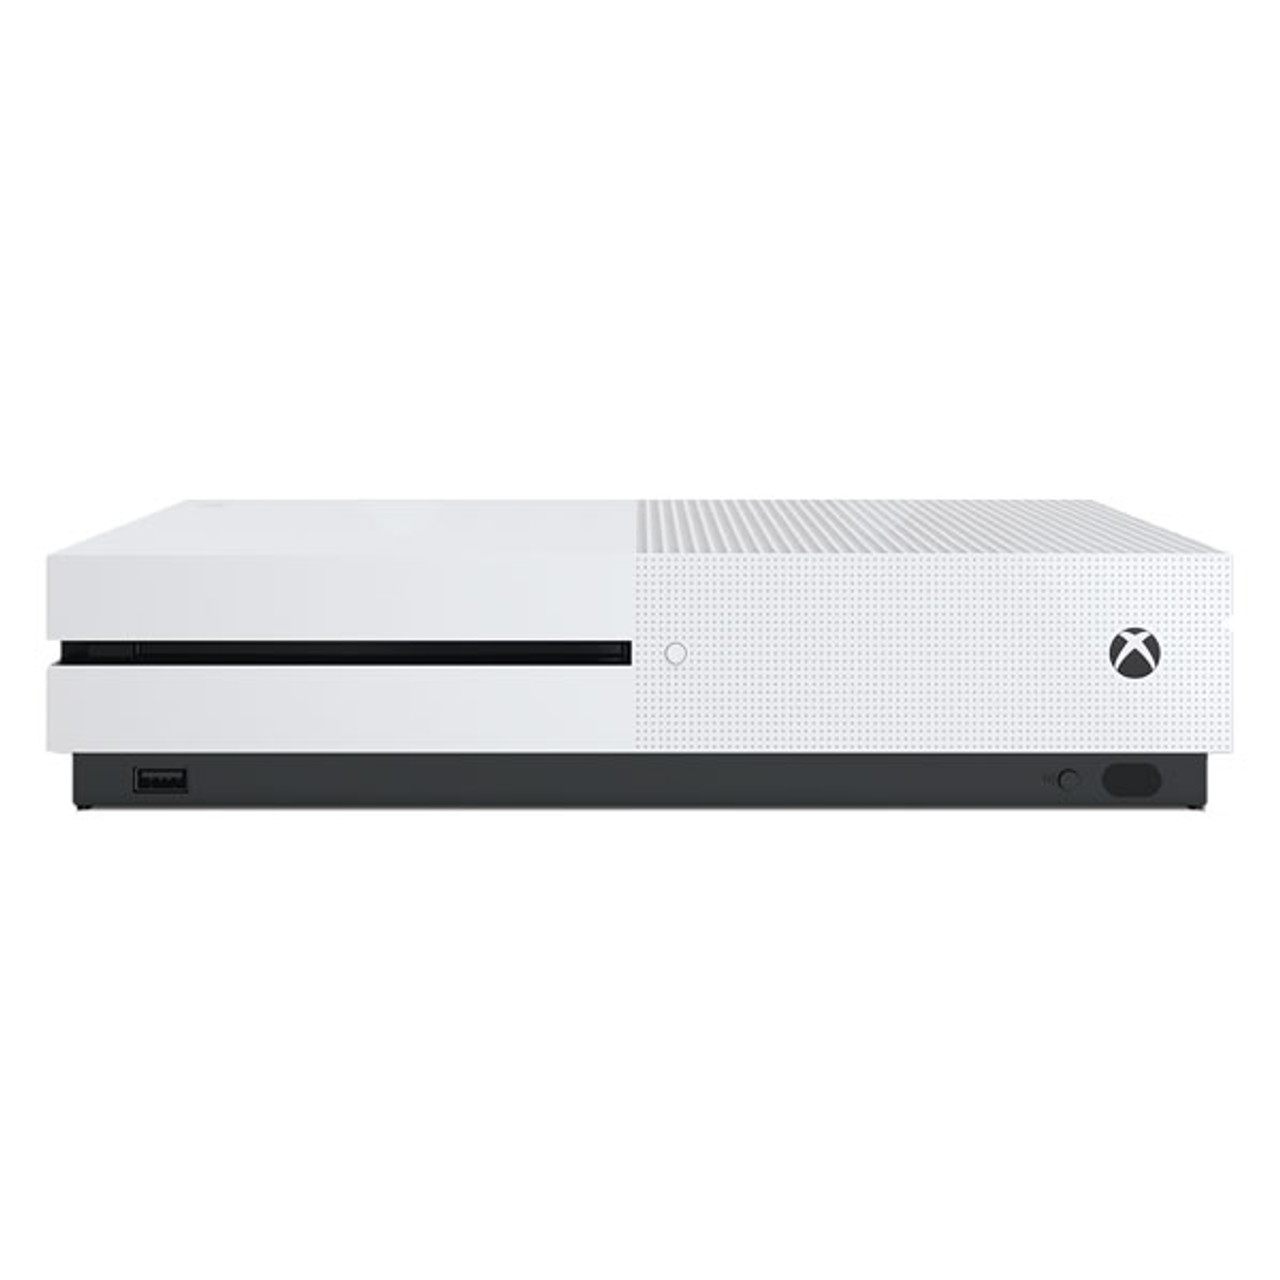 Xbox One S 500GB Player Pak by Microsoft For Sale